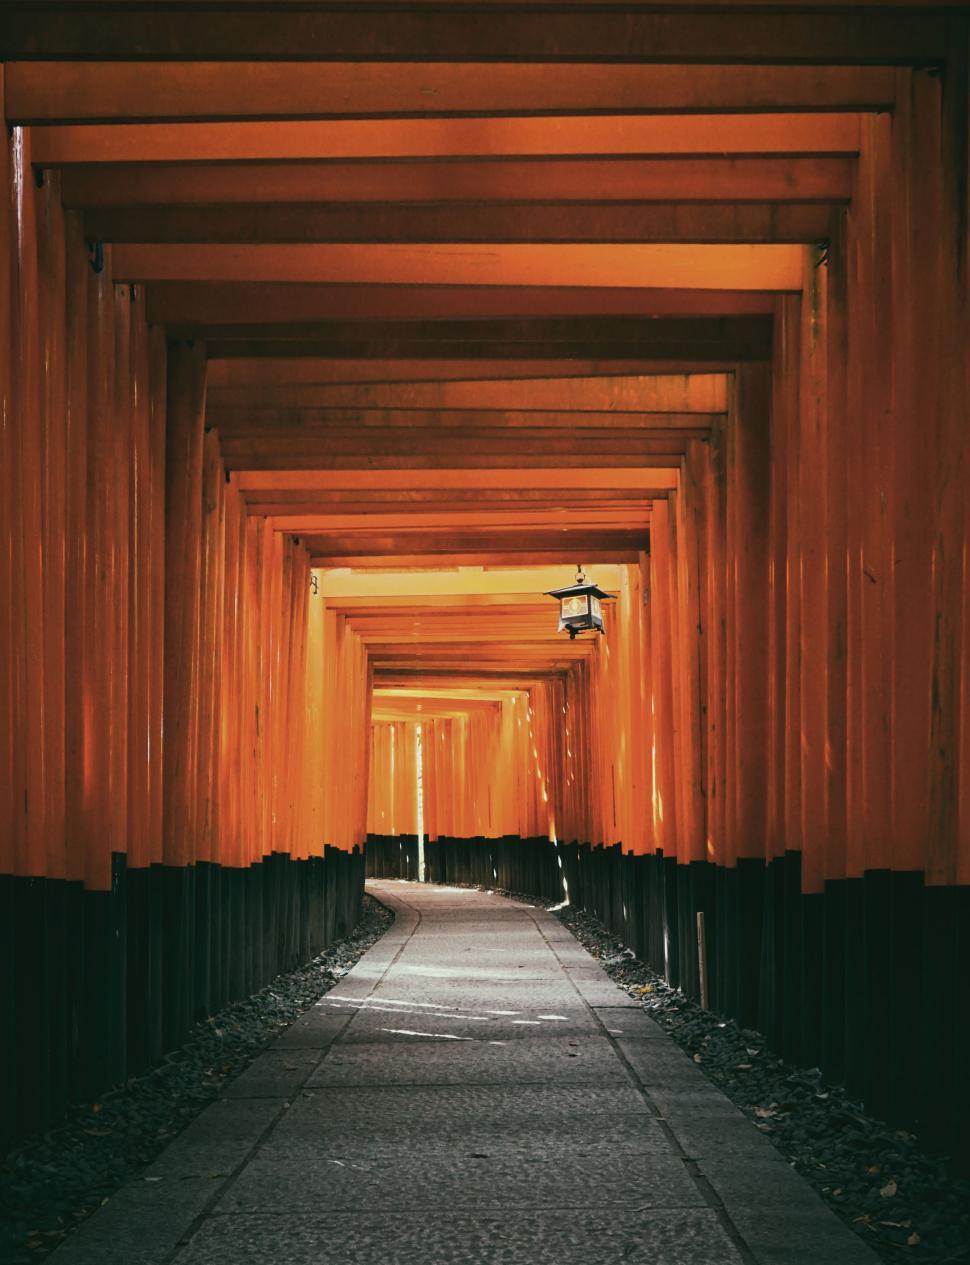 Free Image of Long Walkway With Tall Wooden Pillars 